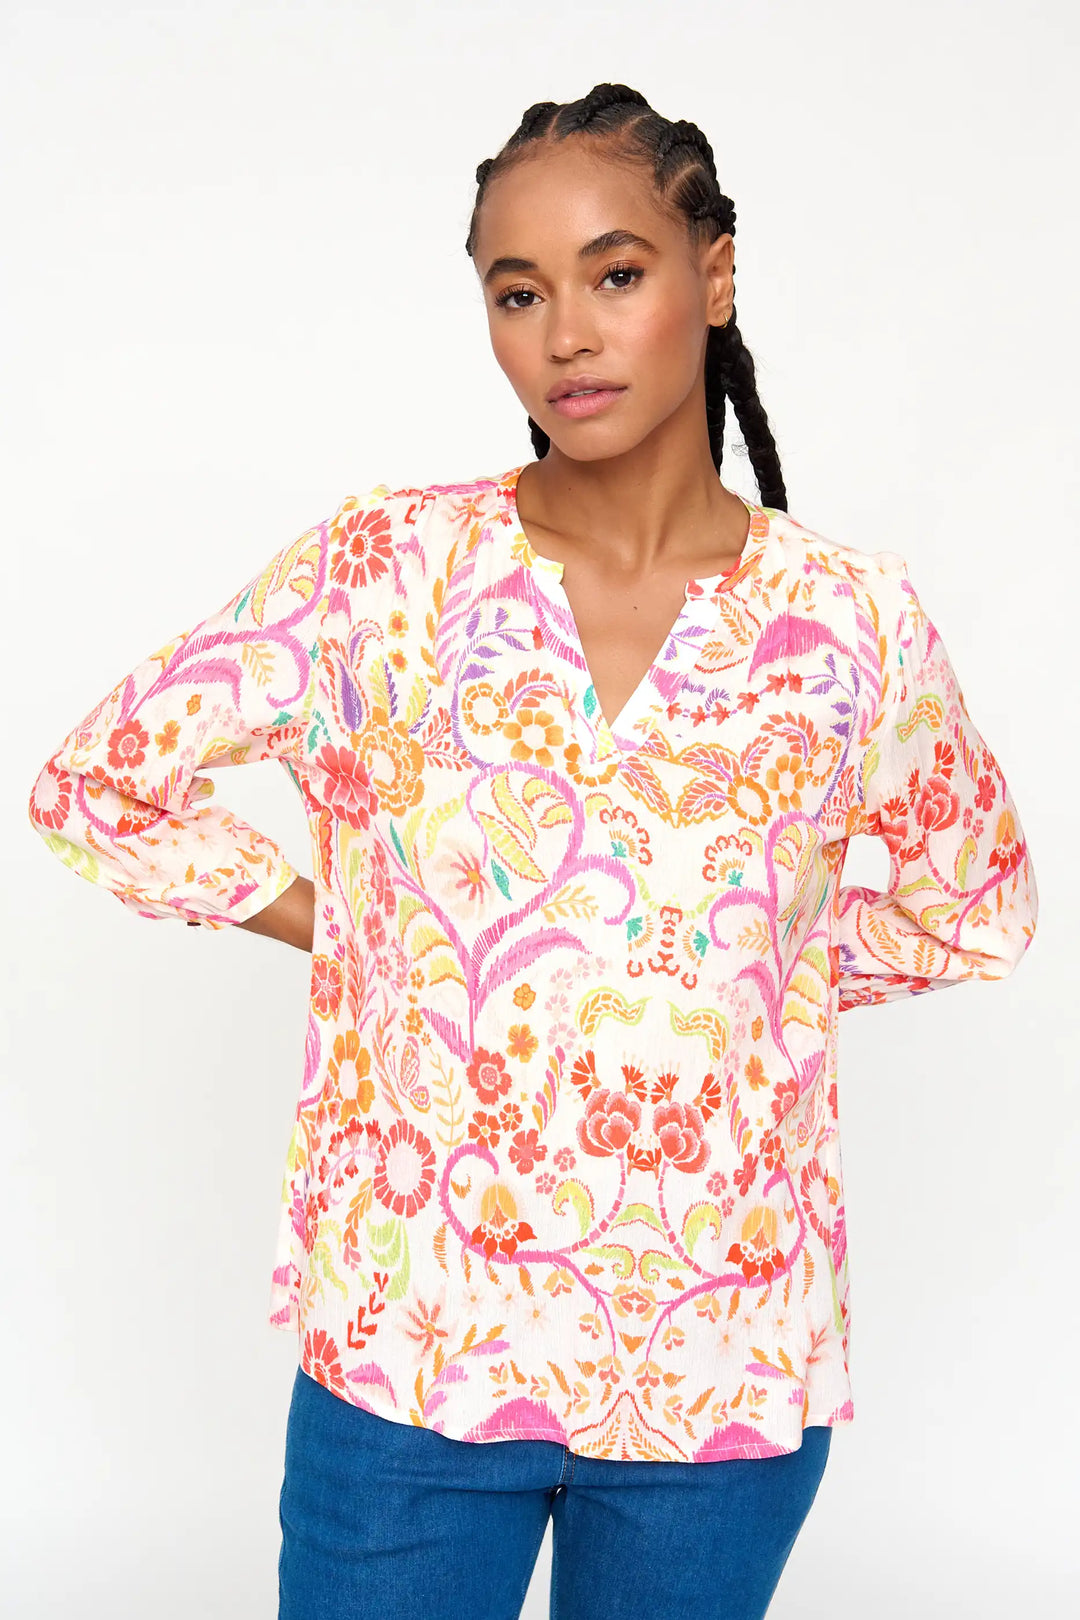 Model presents 'Adelaida' style blouse with bright floral print in pink, orange, and yellow, long sleeves, and V-neckline, paired with dark blue jeans.